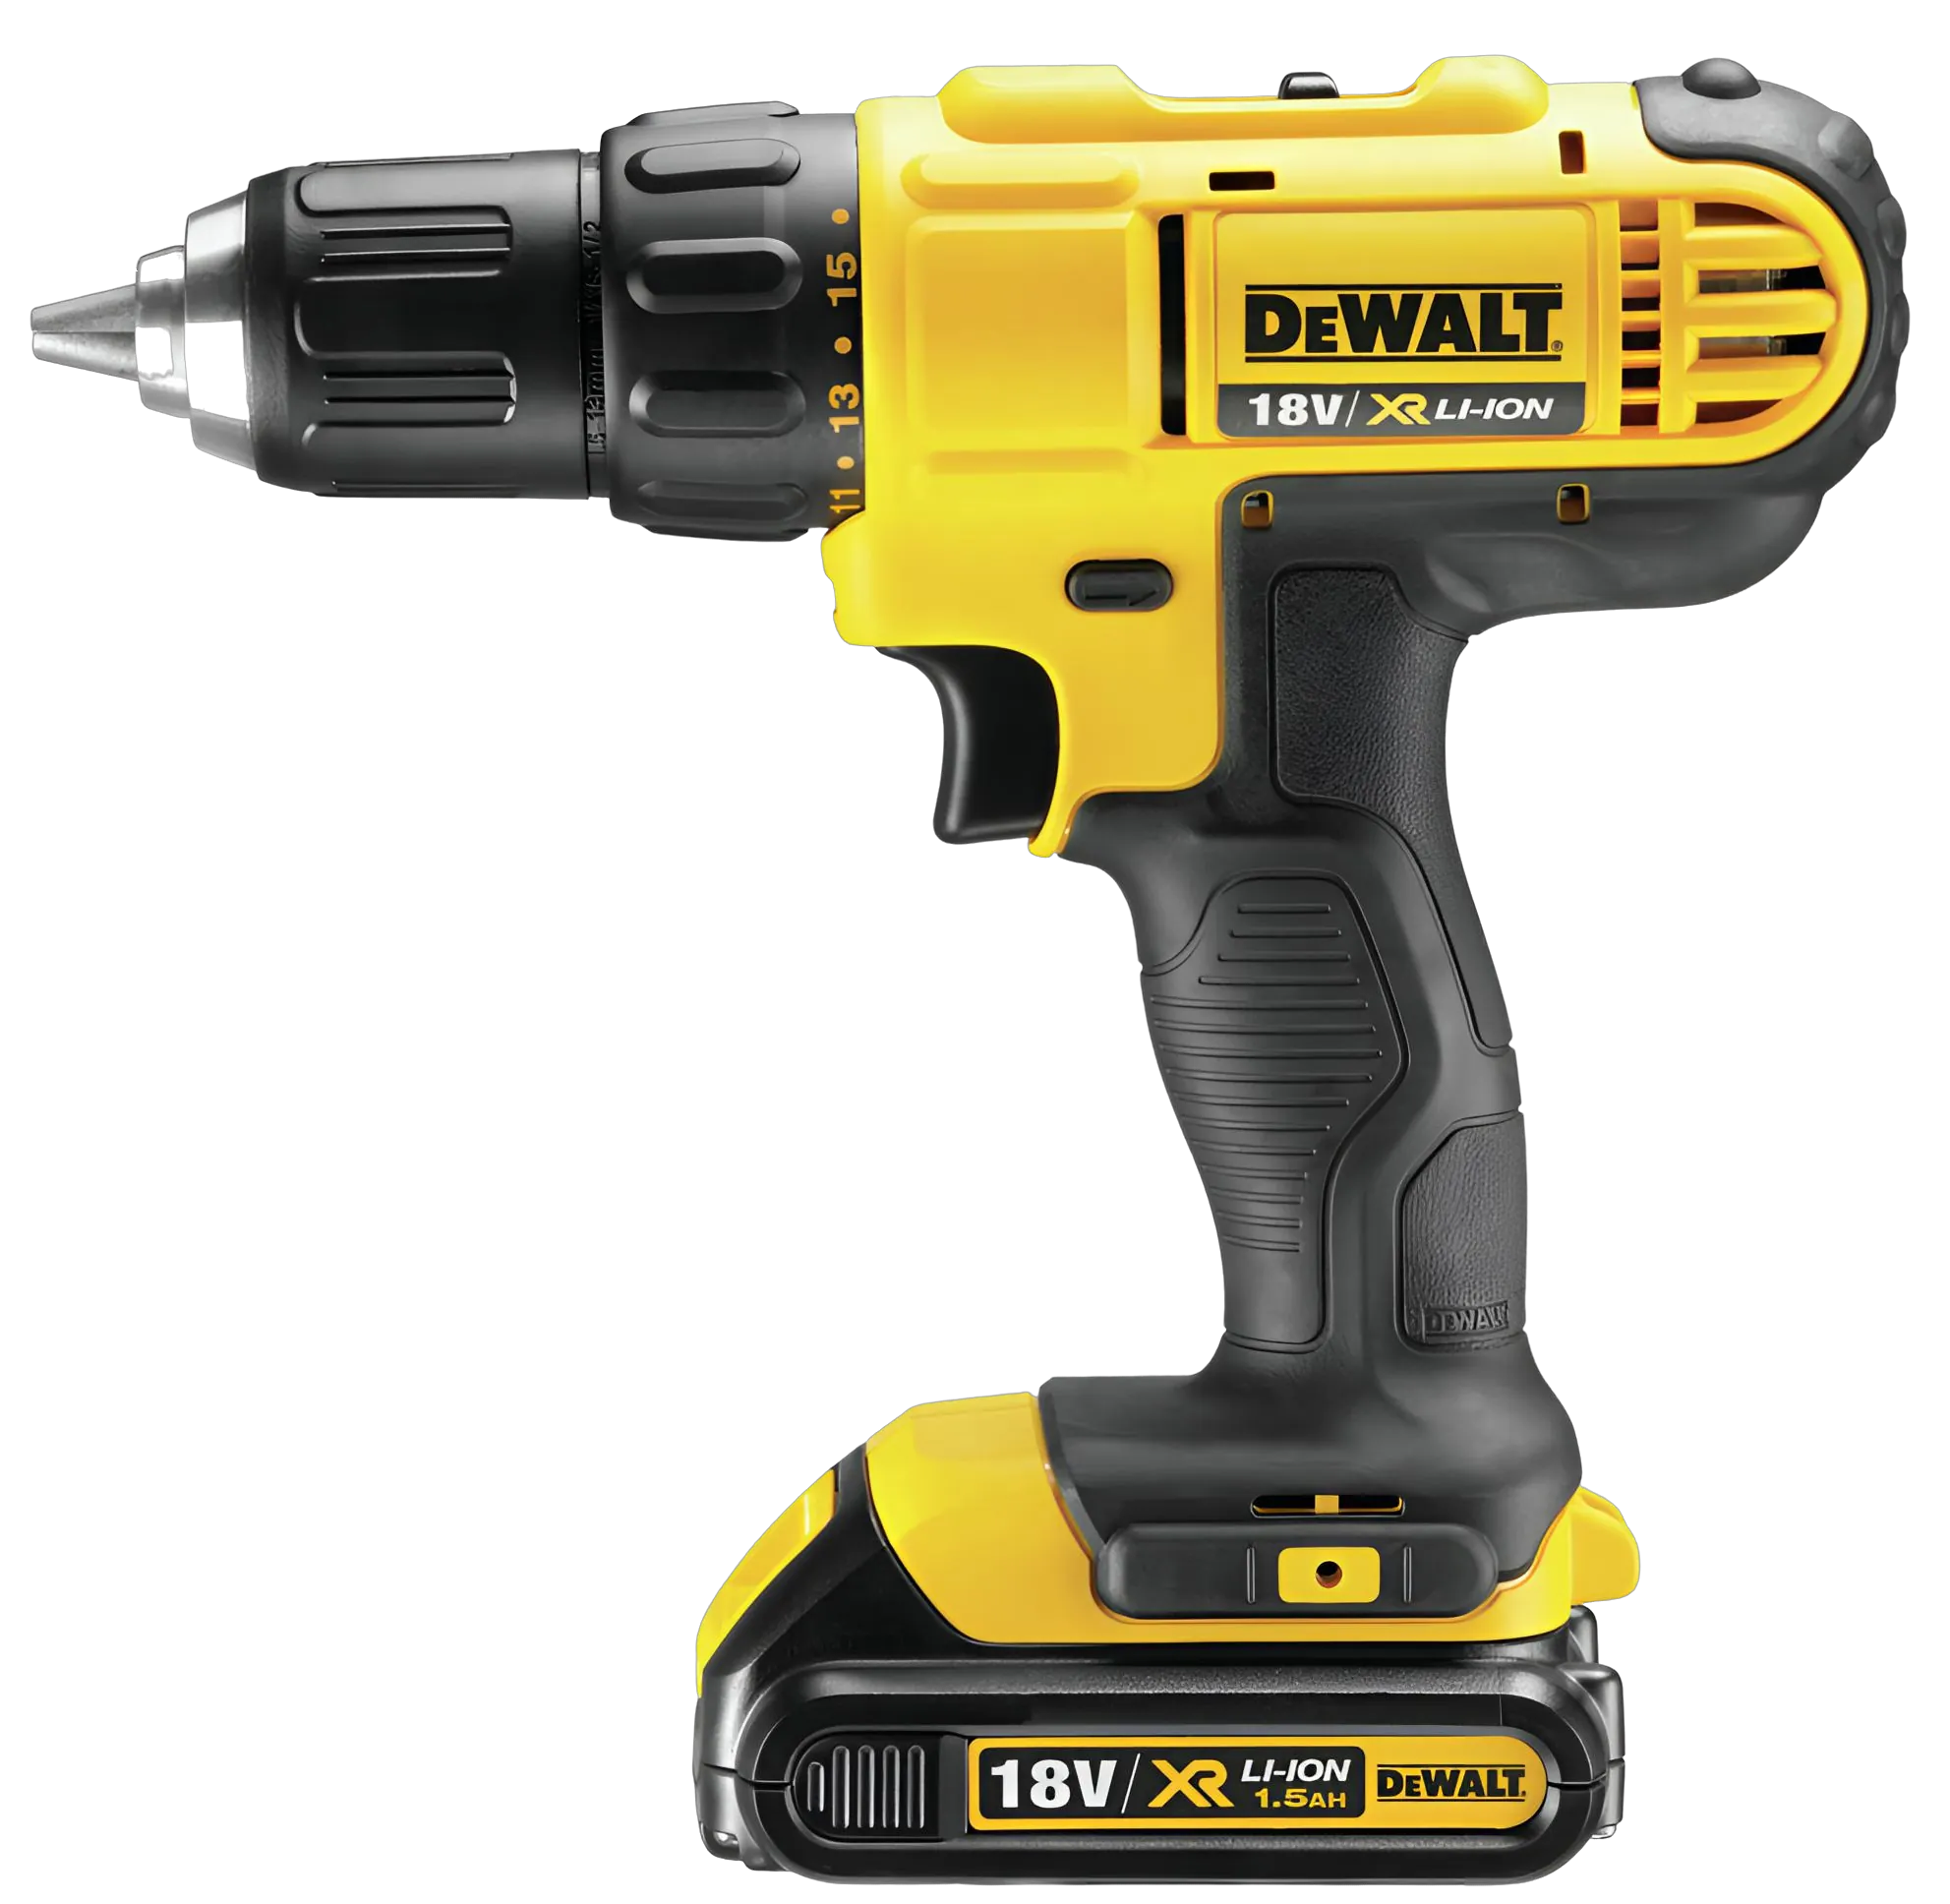 Dewalt Cordless Compact Drill Driver W/Batteries & Charger Dcd771S2_18 V